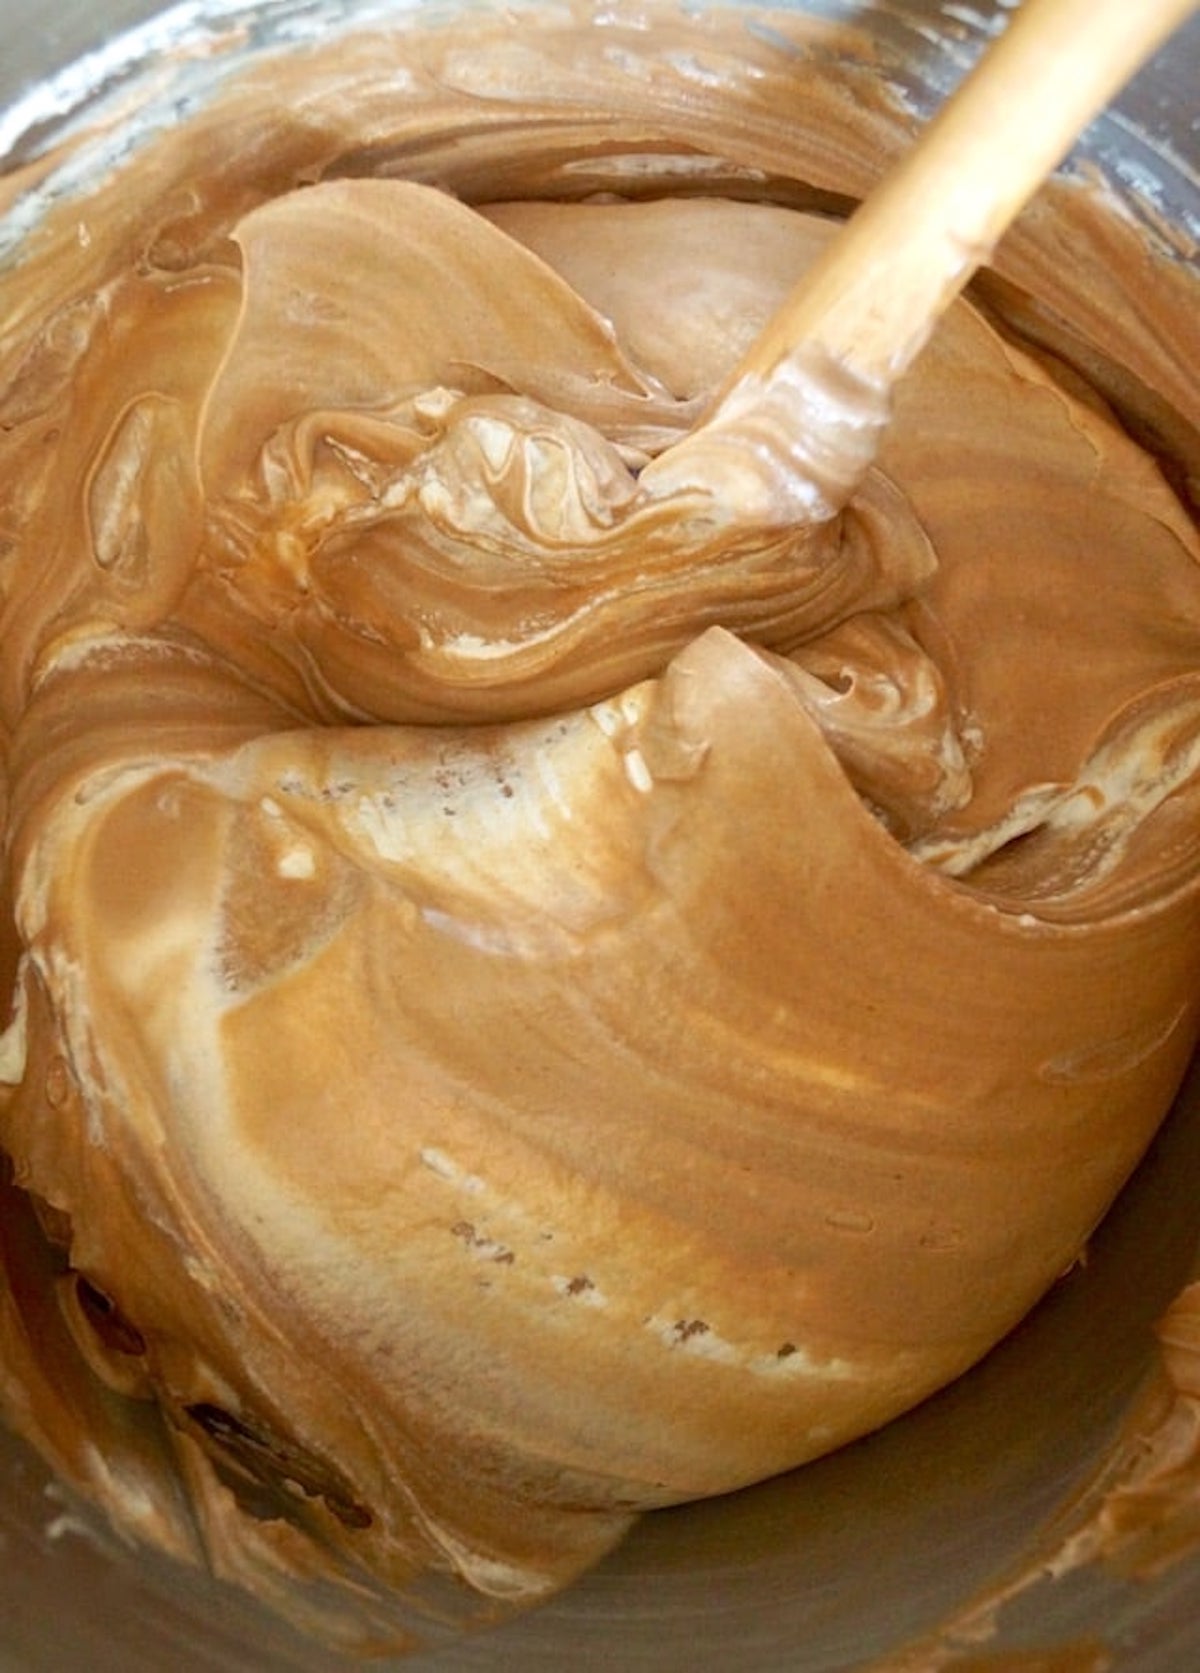 Chocolate-Espresso cream cheese cheesecake filling being mixed with whipped cream.